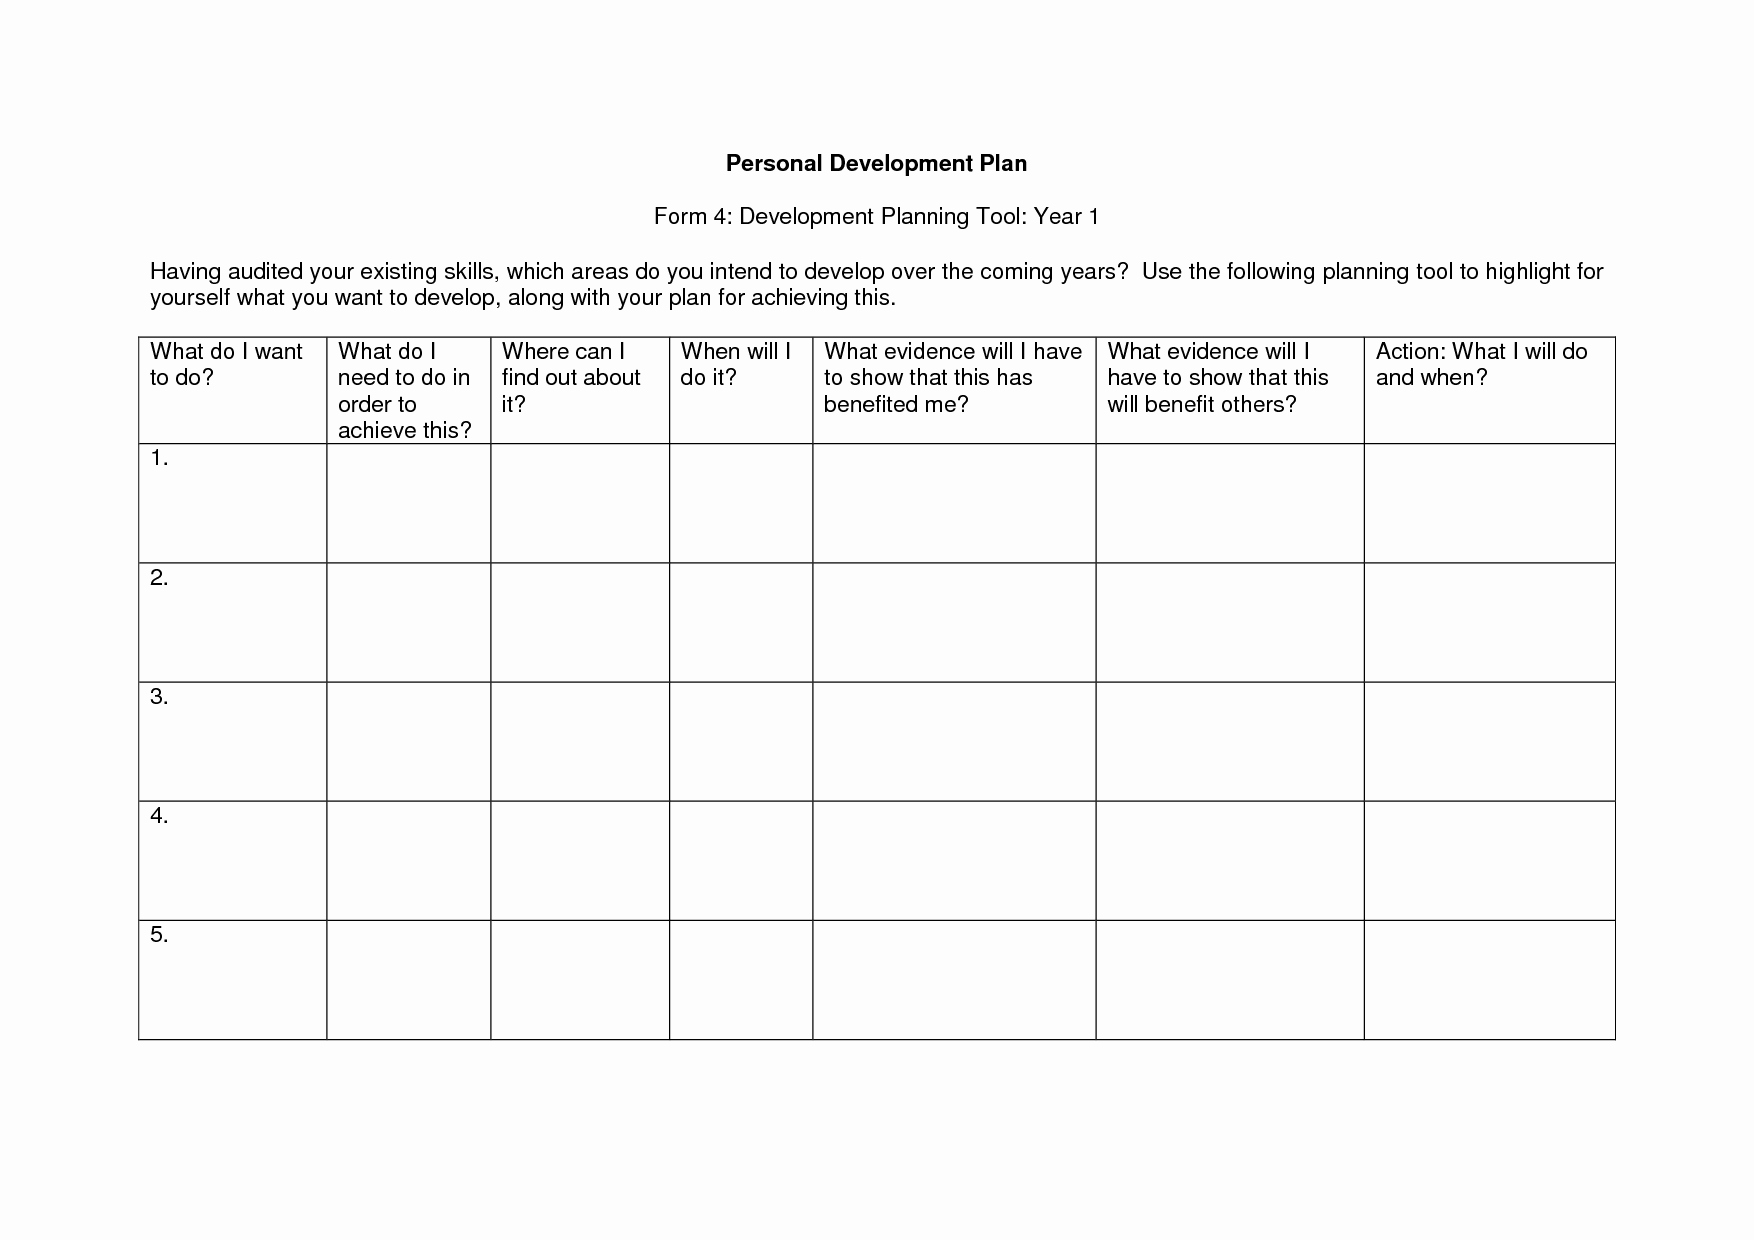 Personal Development Plan Template Awesome Personal Development Plan Templates Google Search